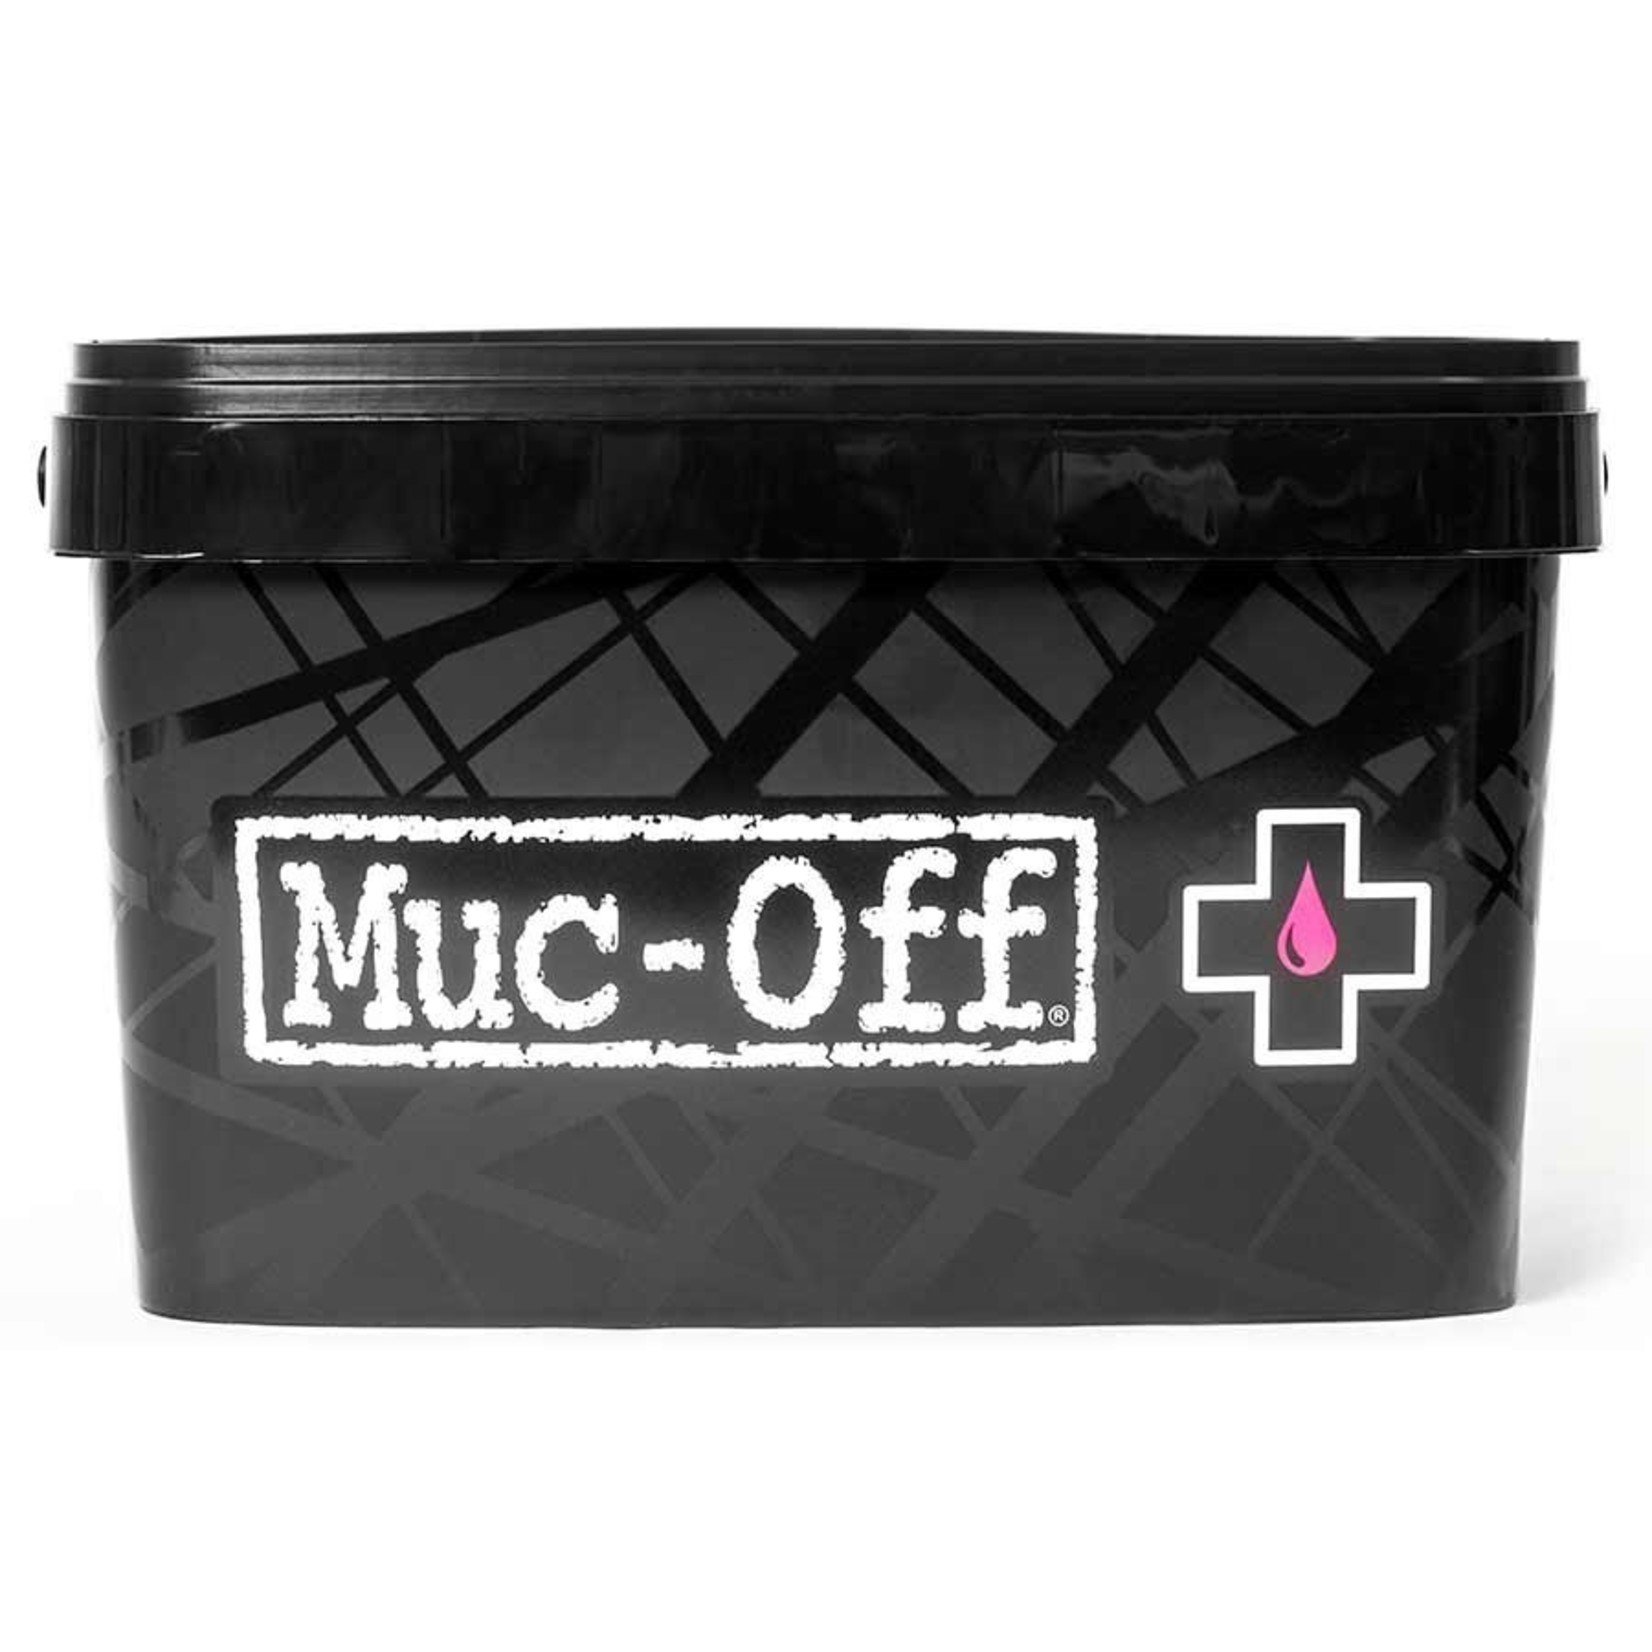 Muc-Off Muc-Off 8 in 1 Bicycle Cleaning Kit